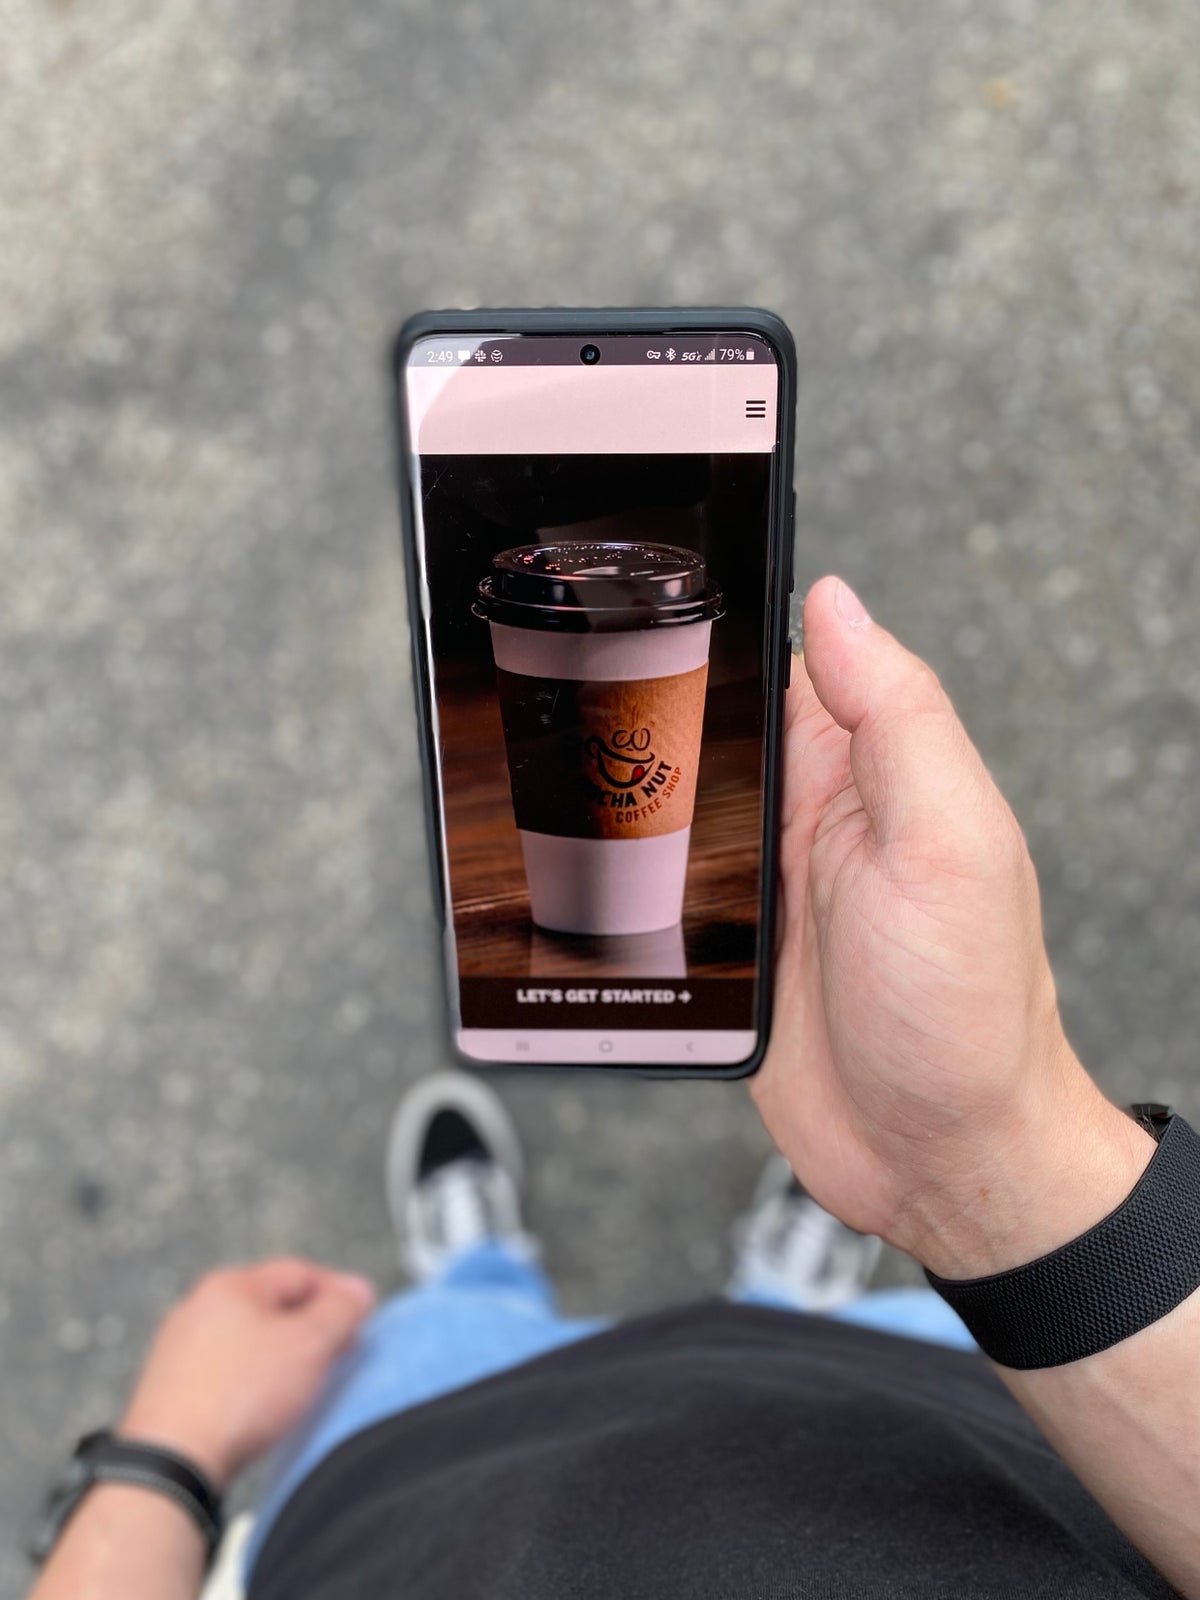 Mocha Nut app open on a phone in a person's hand